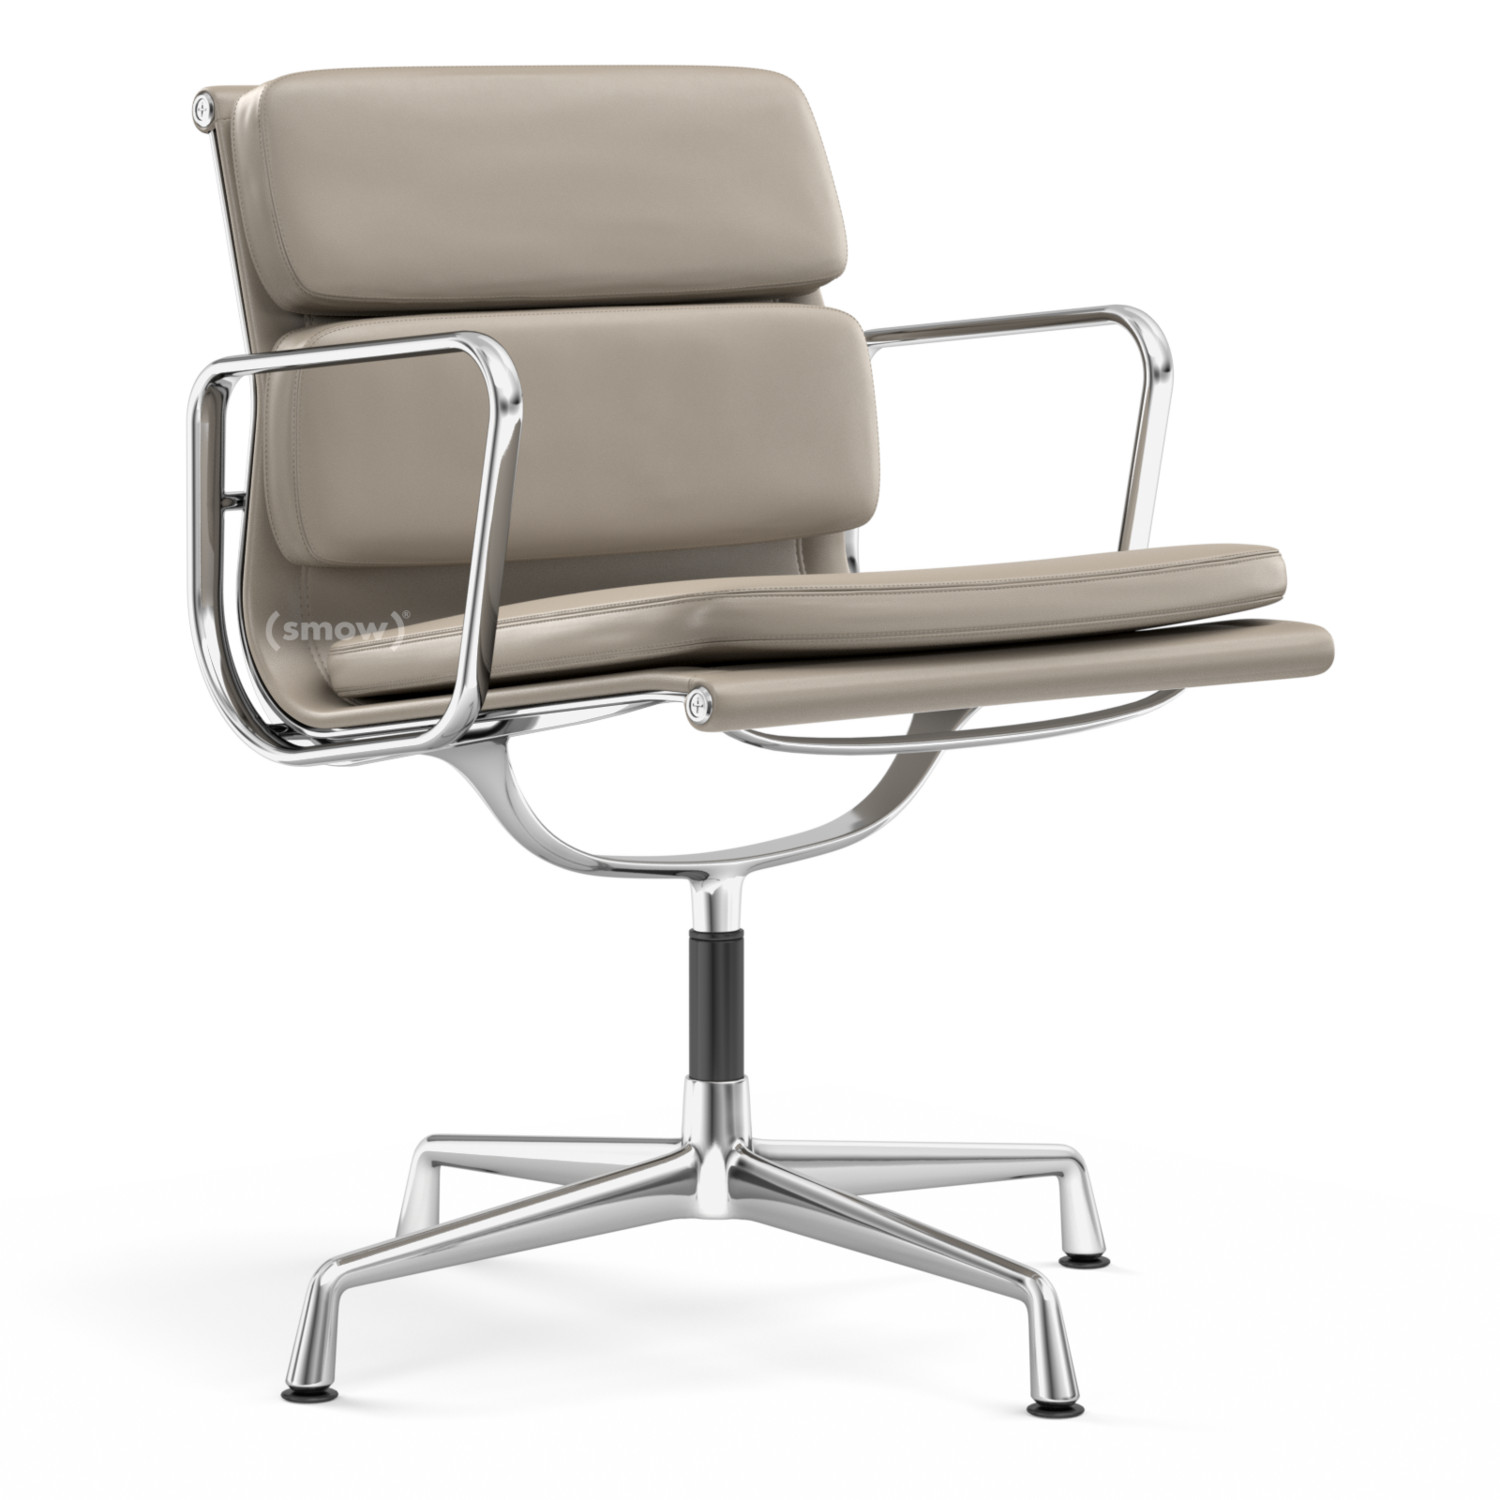 Eames Vitra EA 208 White Leather Chrome Based Soft-Pad Chair by Charles & Ray Eames 